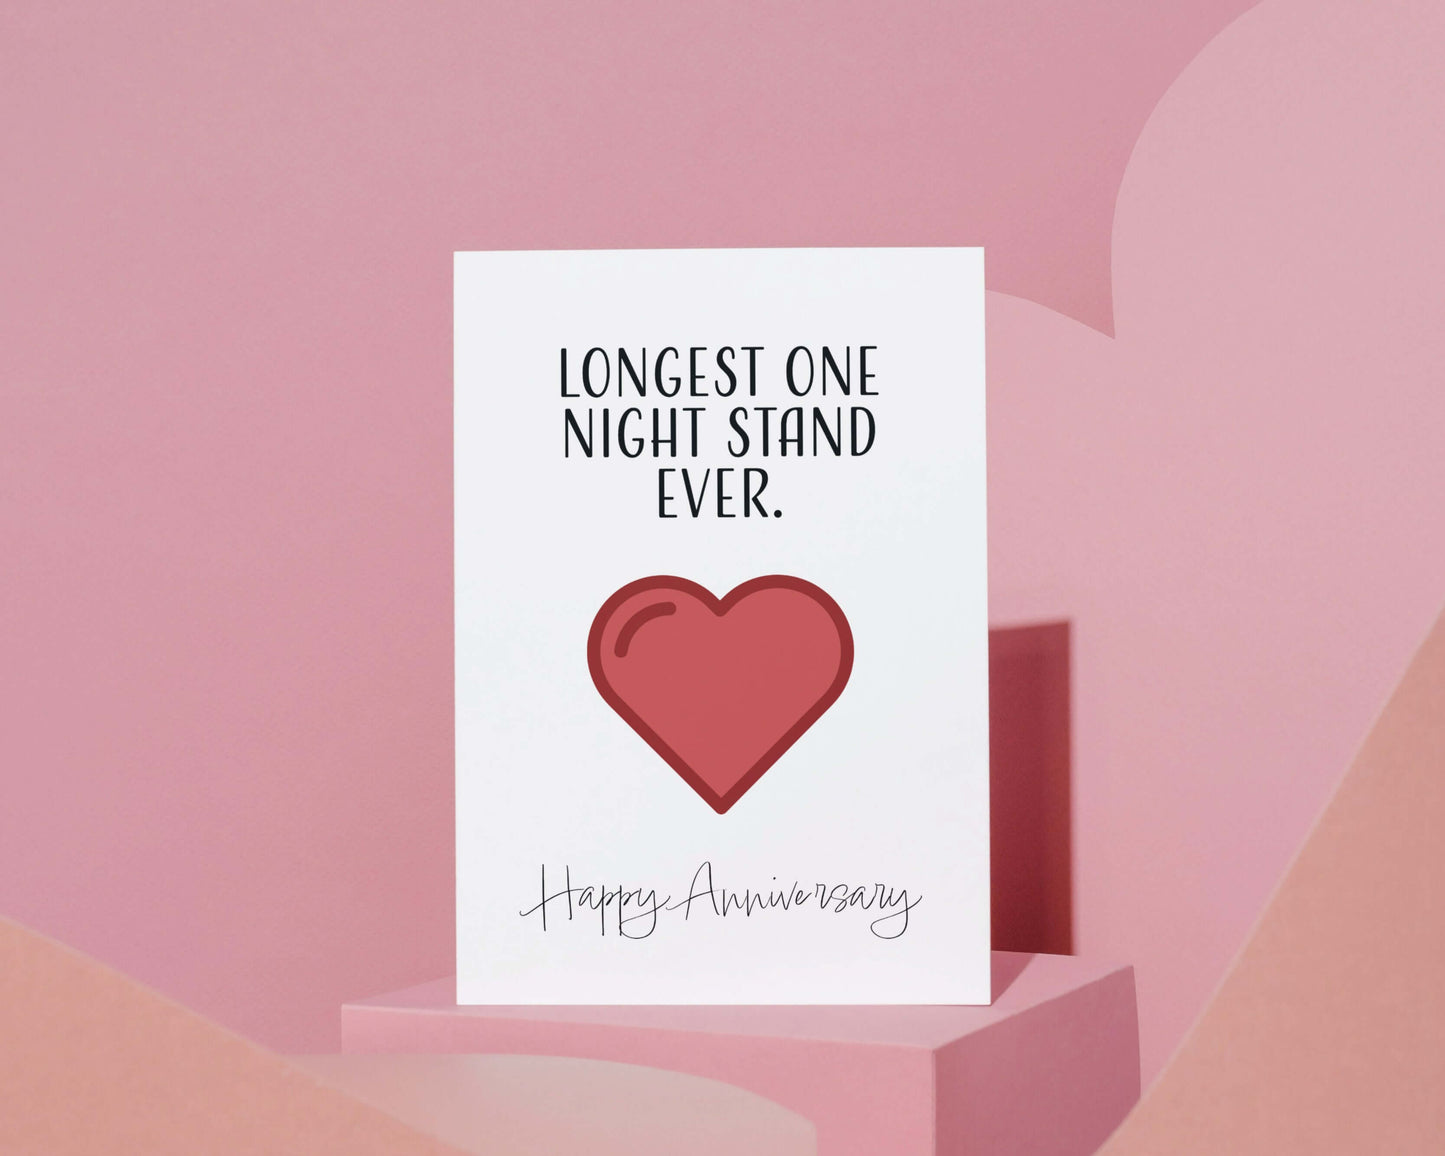 The Card Store UK's Longest One Night Stand Ever | Funny Anniversary Card | Funny Rude Wedding Relationship Anniversary Greeting Card, Anniversary Cards for £3.50 each